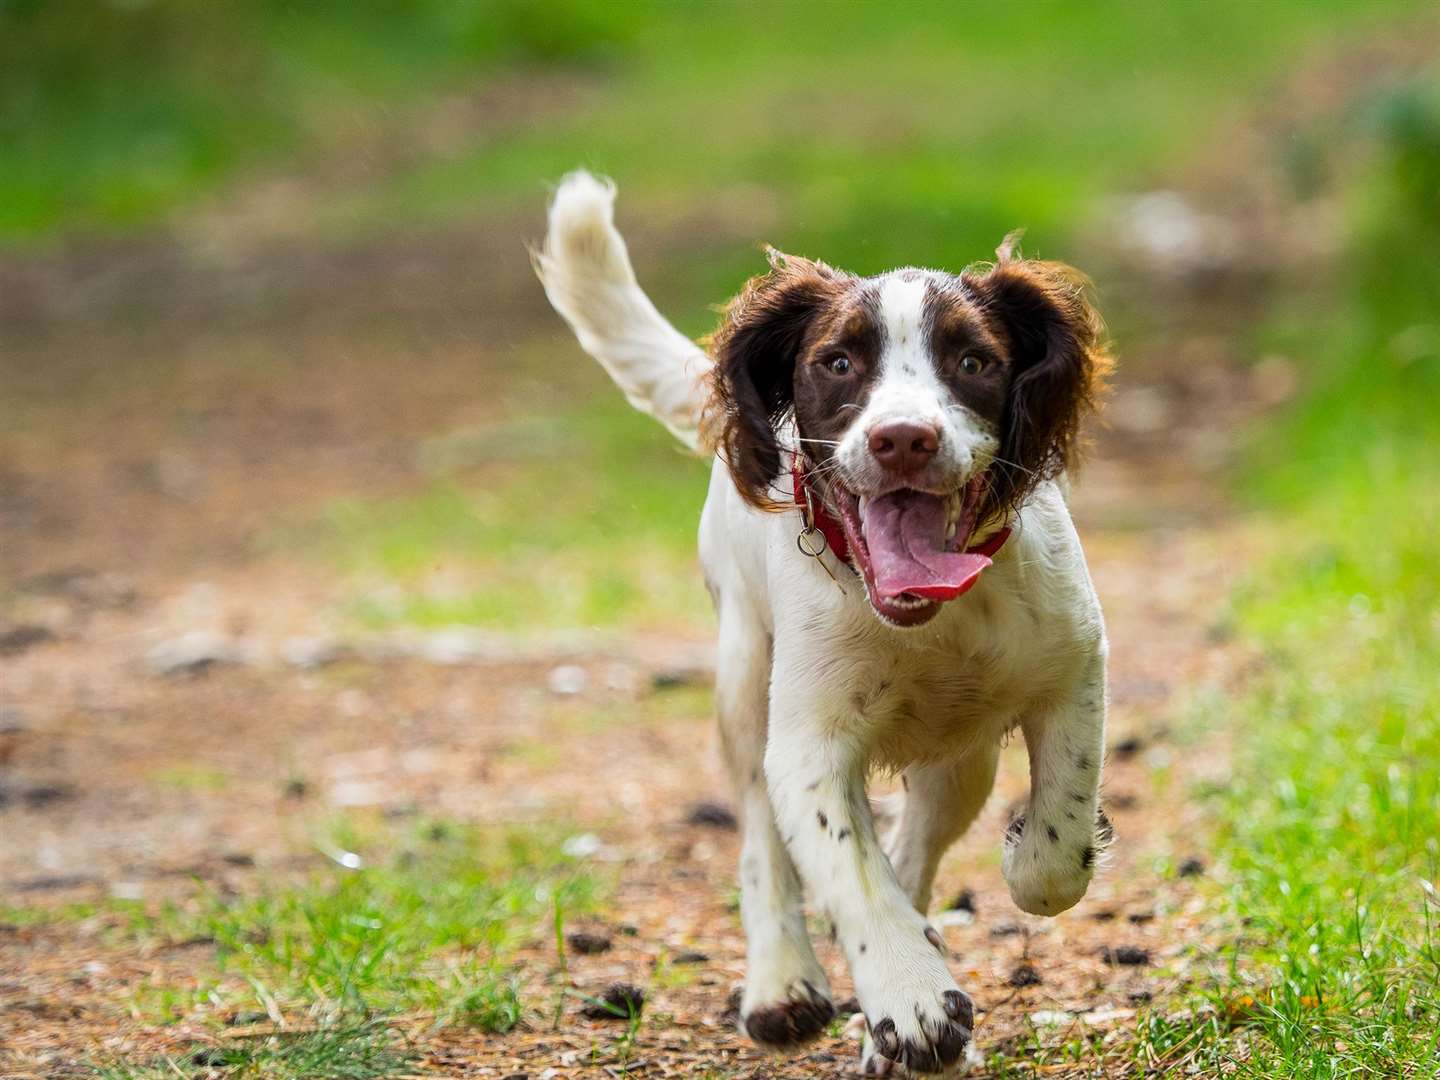 A springer spaniel puppy.  Image from a picture agency